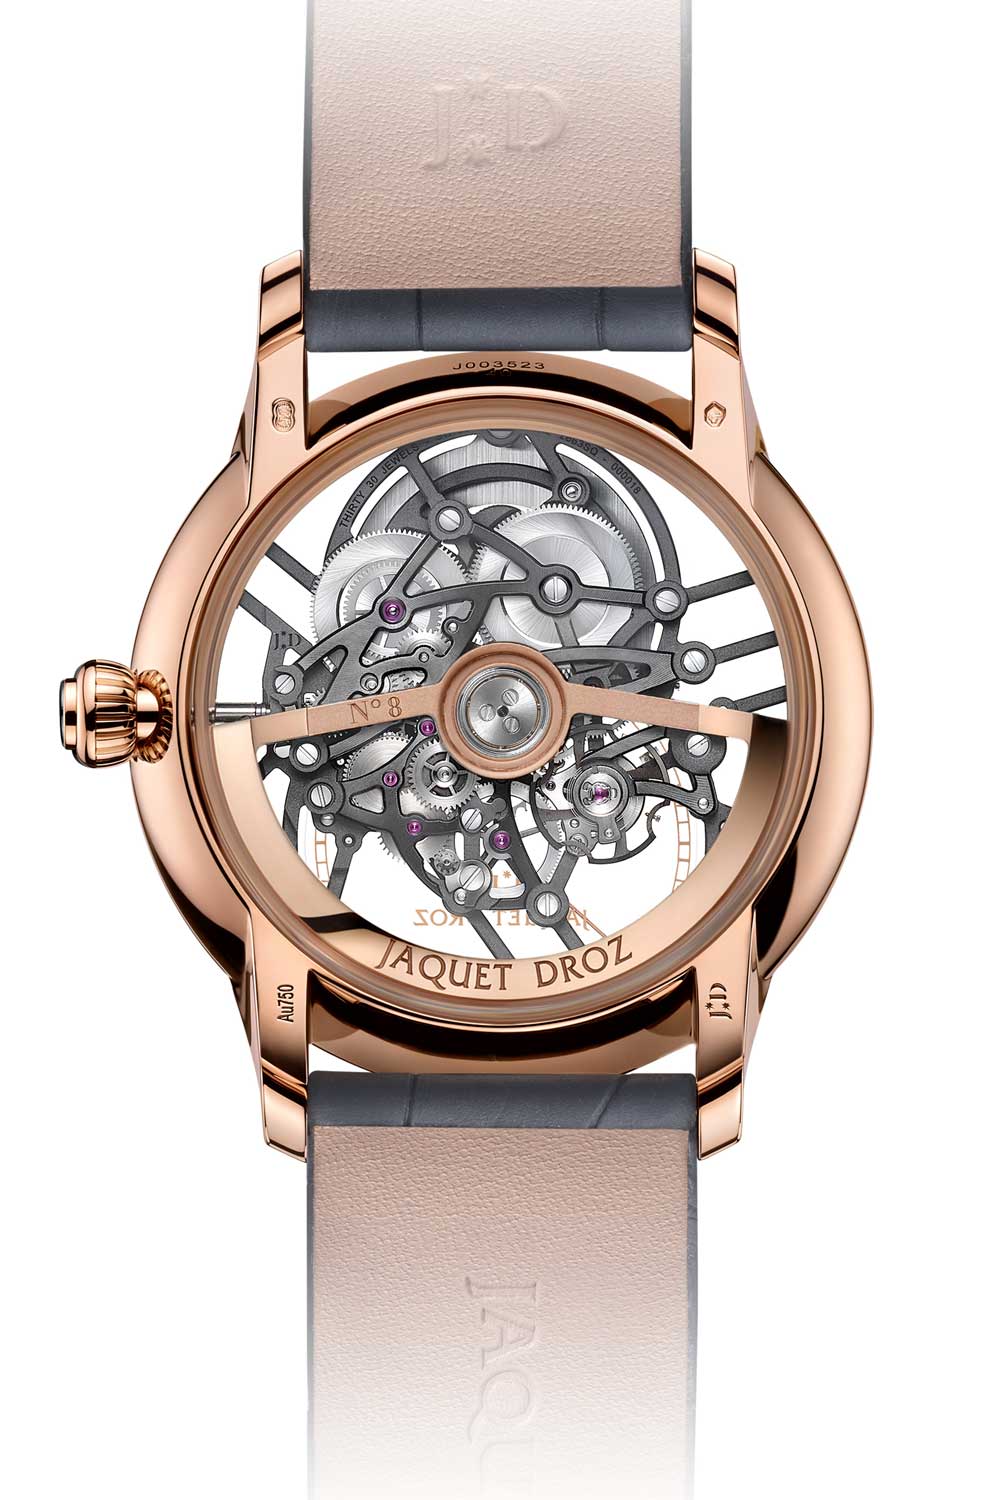 The 2020 The Jaquet Droz Grande Seconde Skelet-One in red gold (41mm)